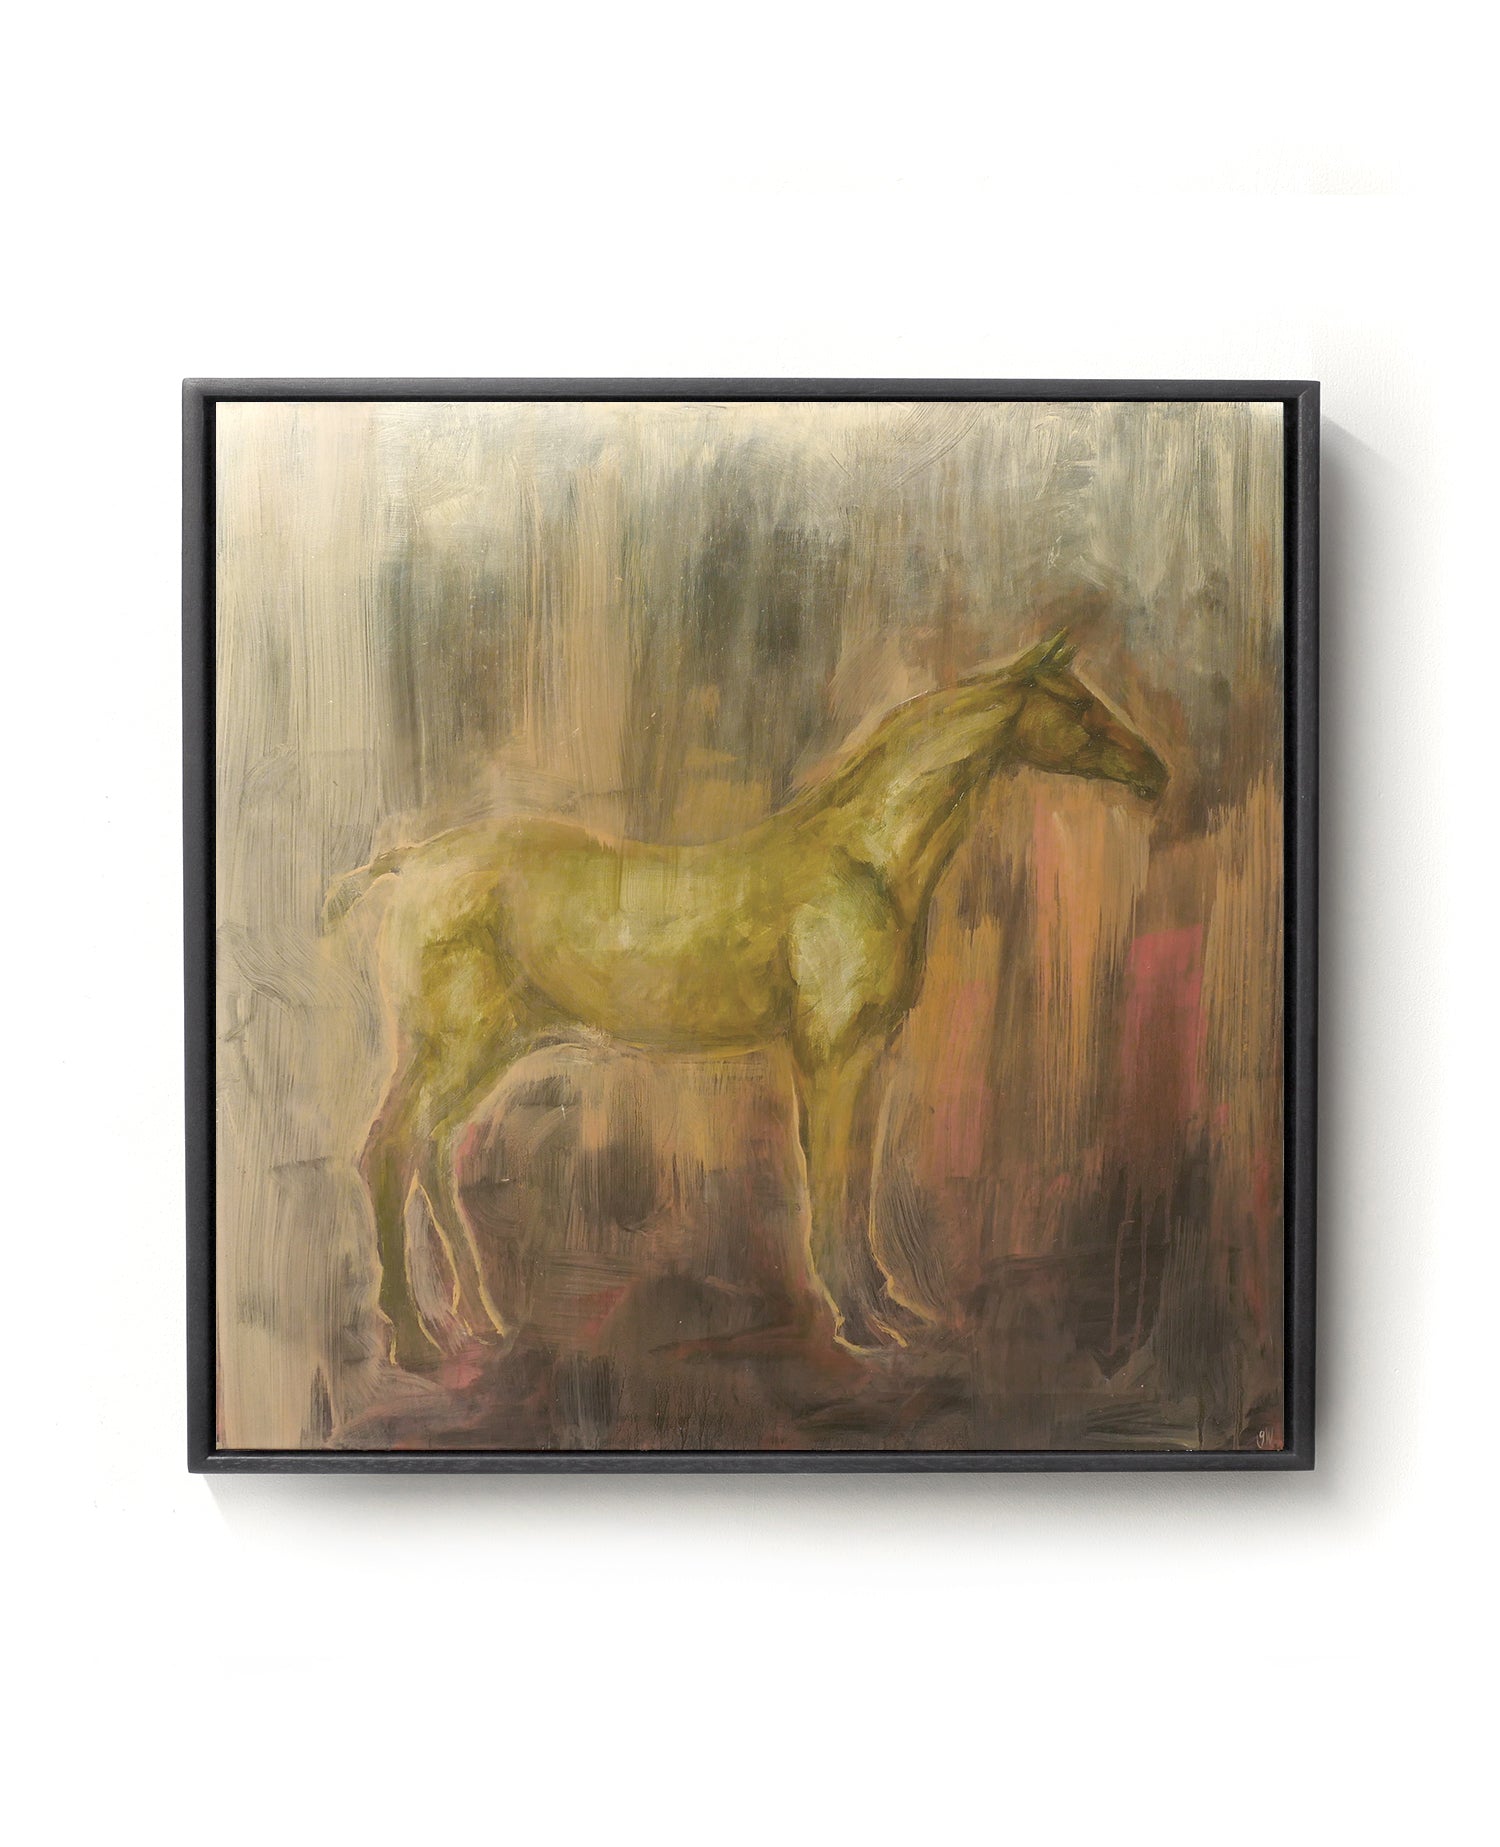 Oil painting on canvas of a horse in brown, pink and gold tones.